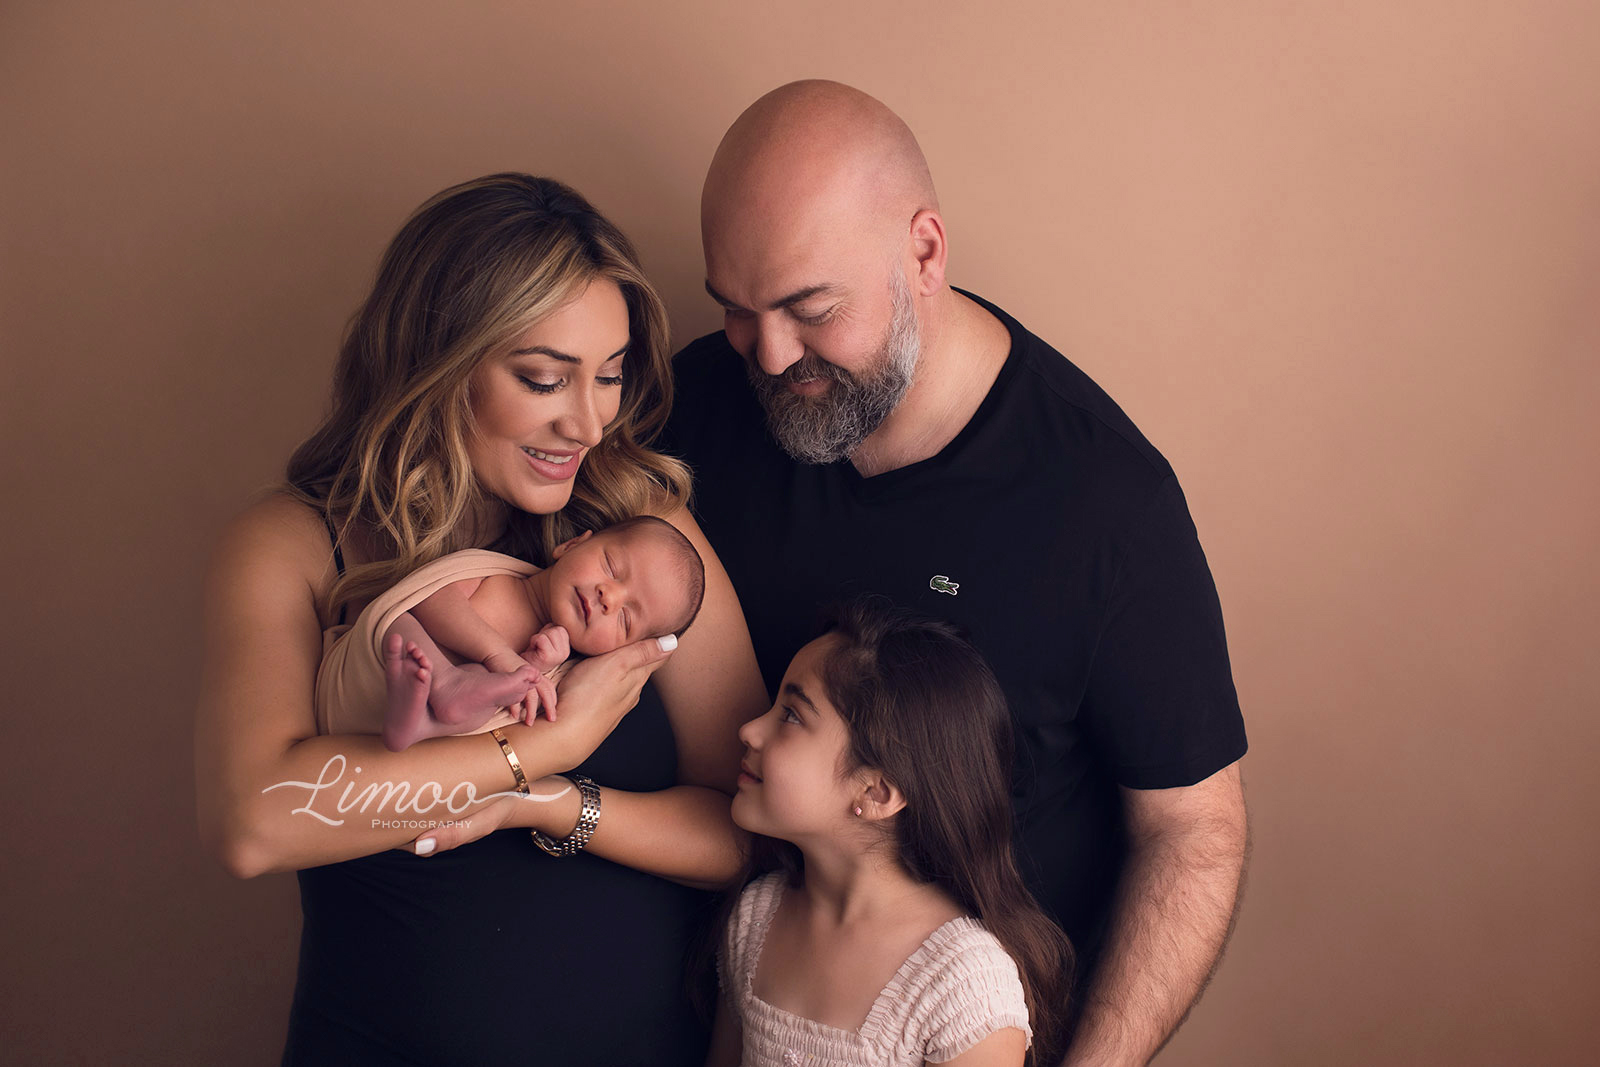 Limoo photography what to wear family photos newborn session bay area san jose